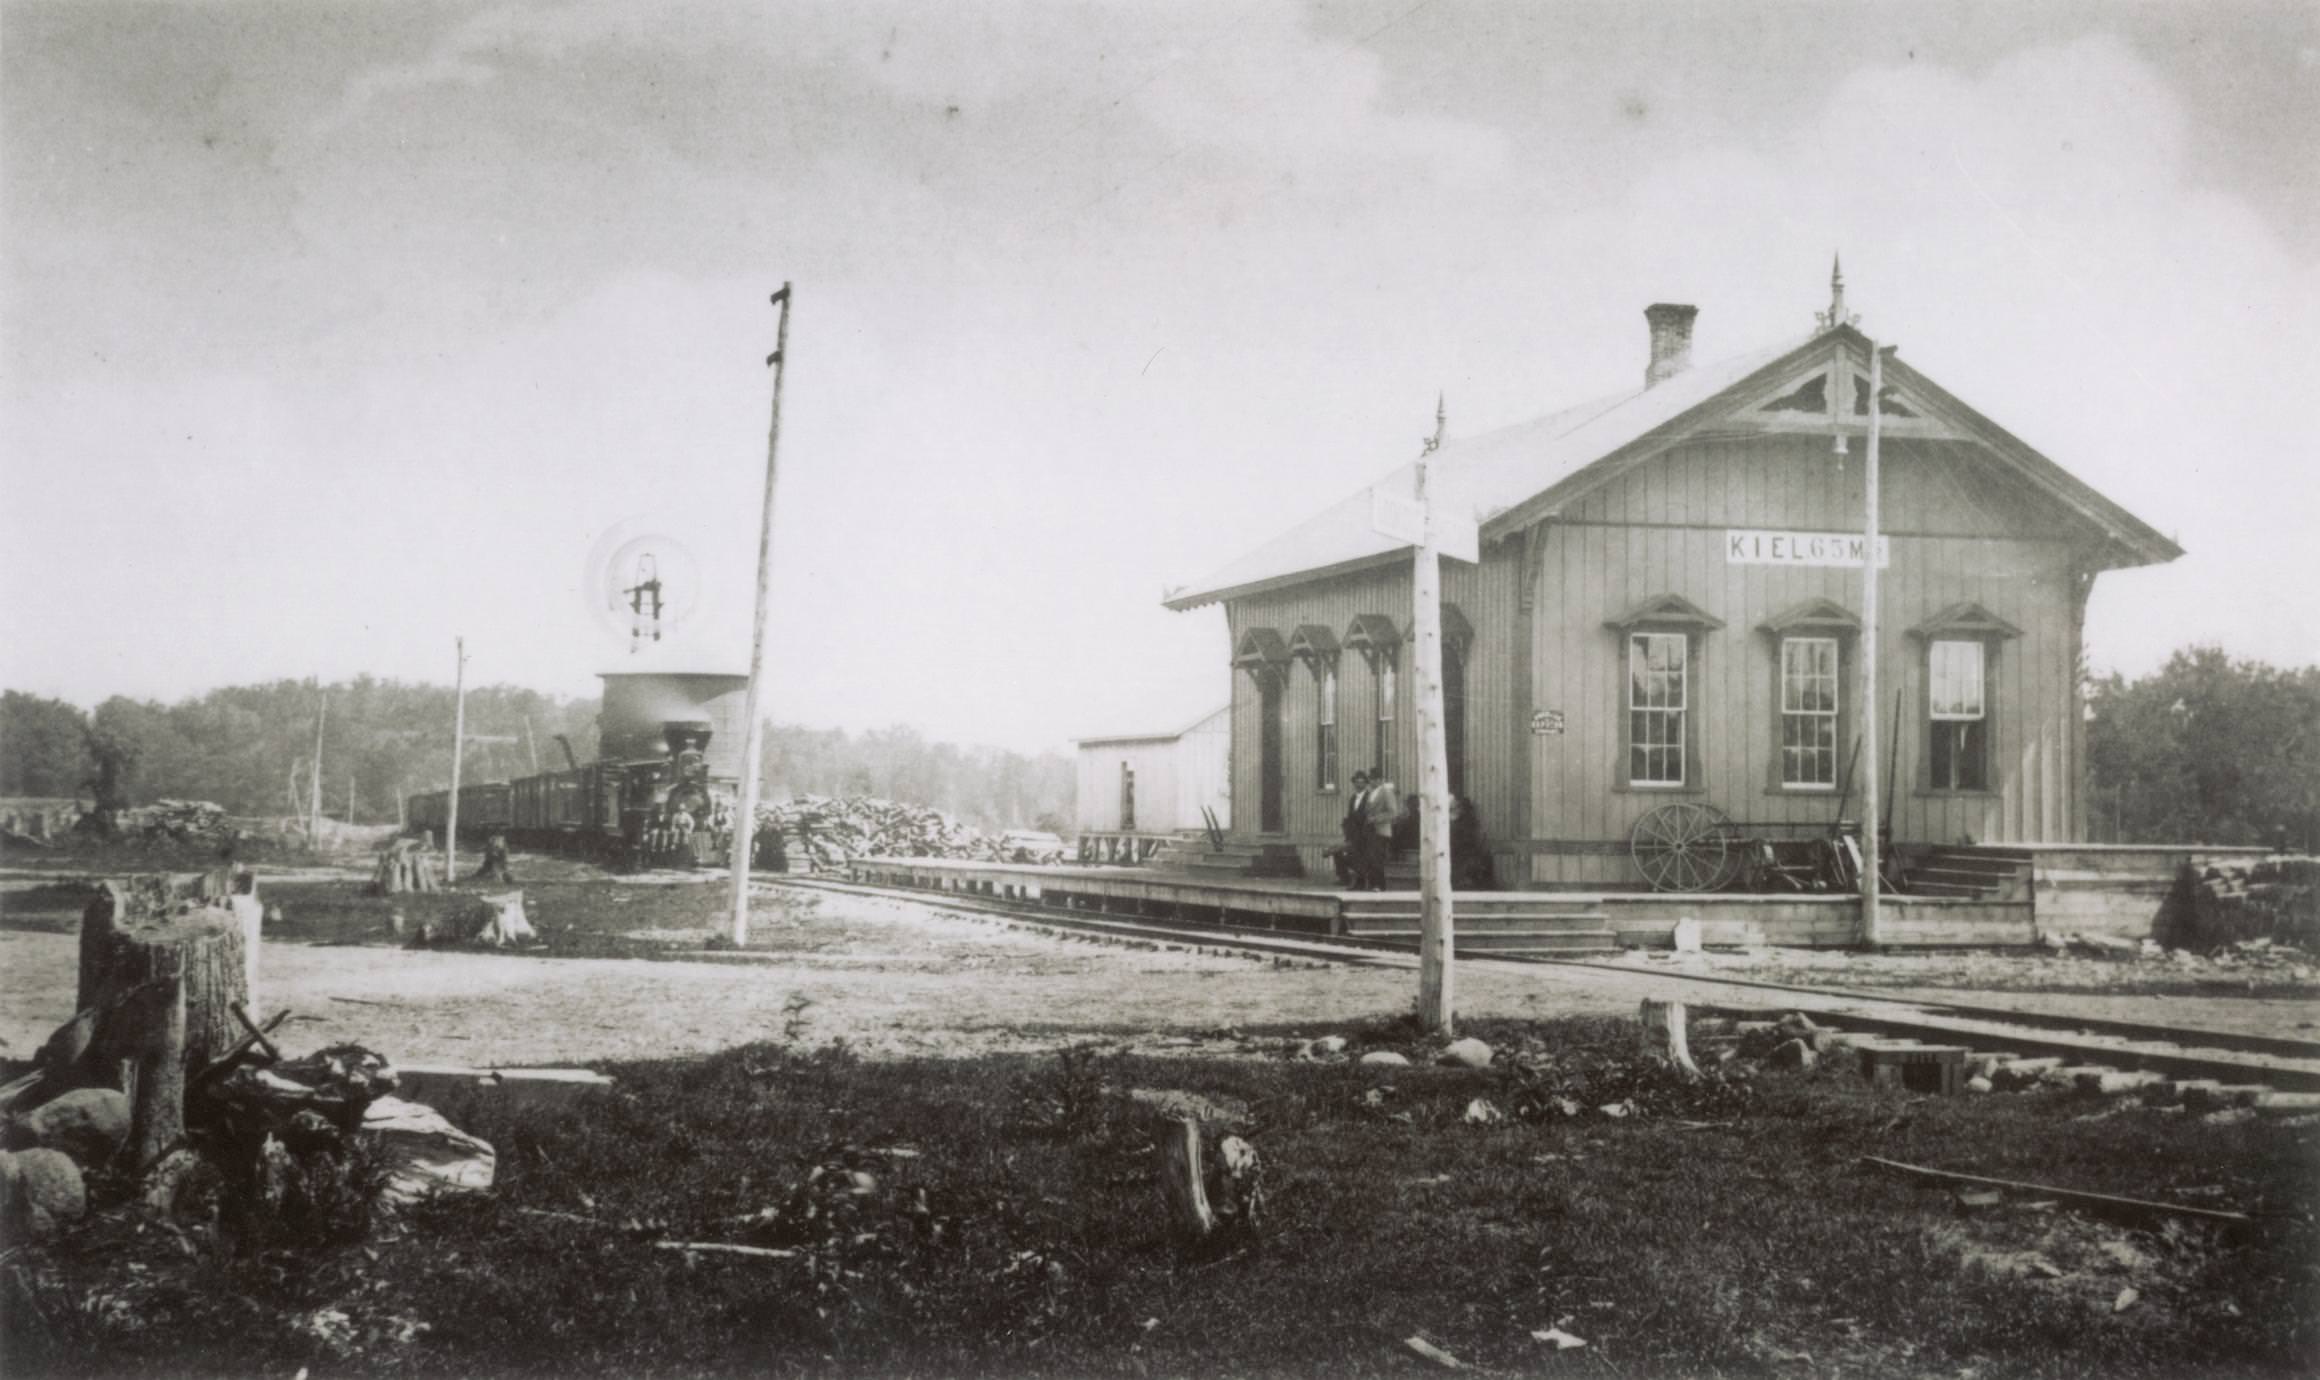 Two men are standing on the platform outside of Kiel’s first Depot, 1870